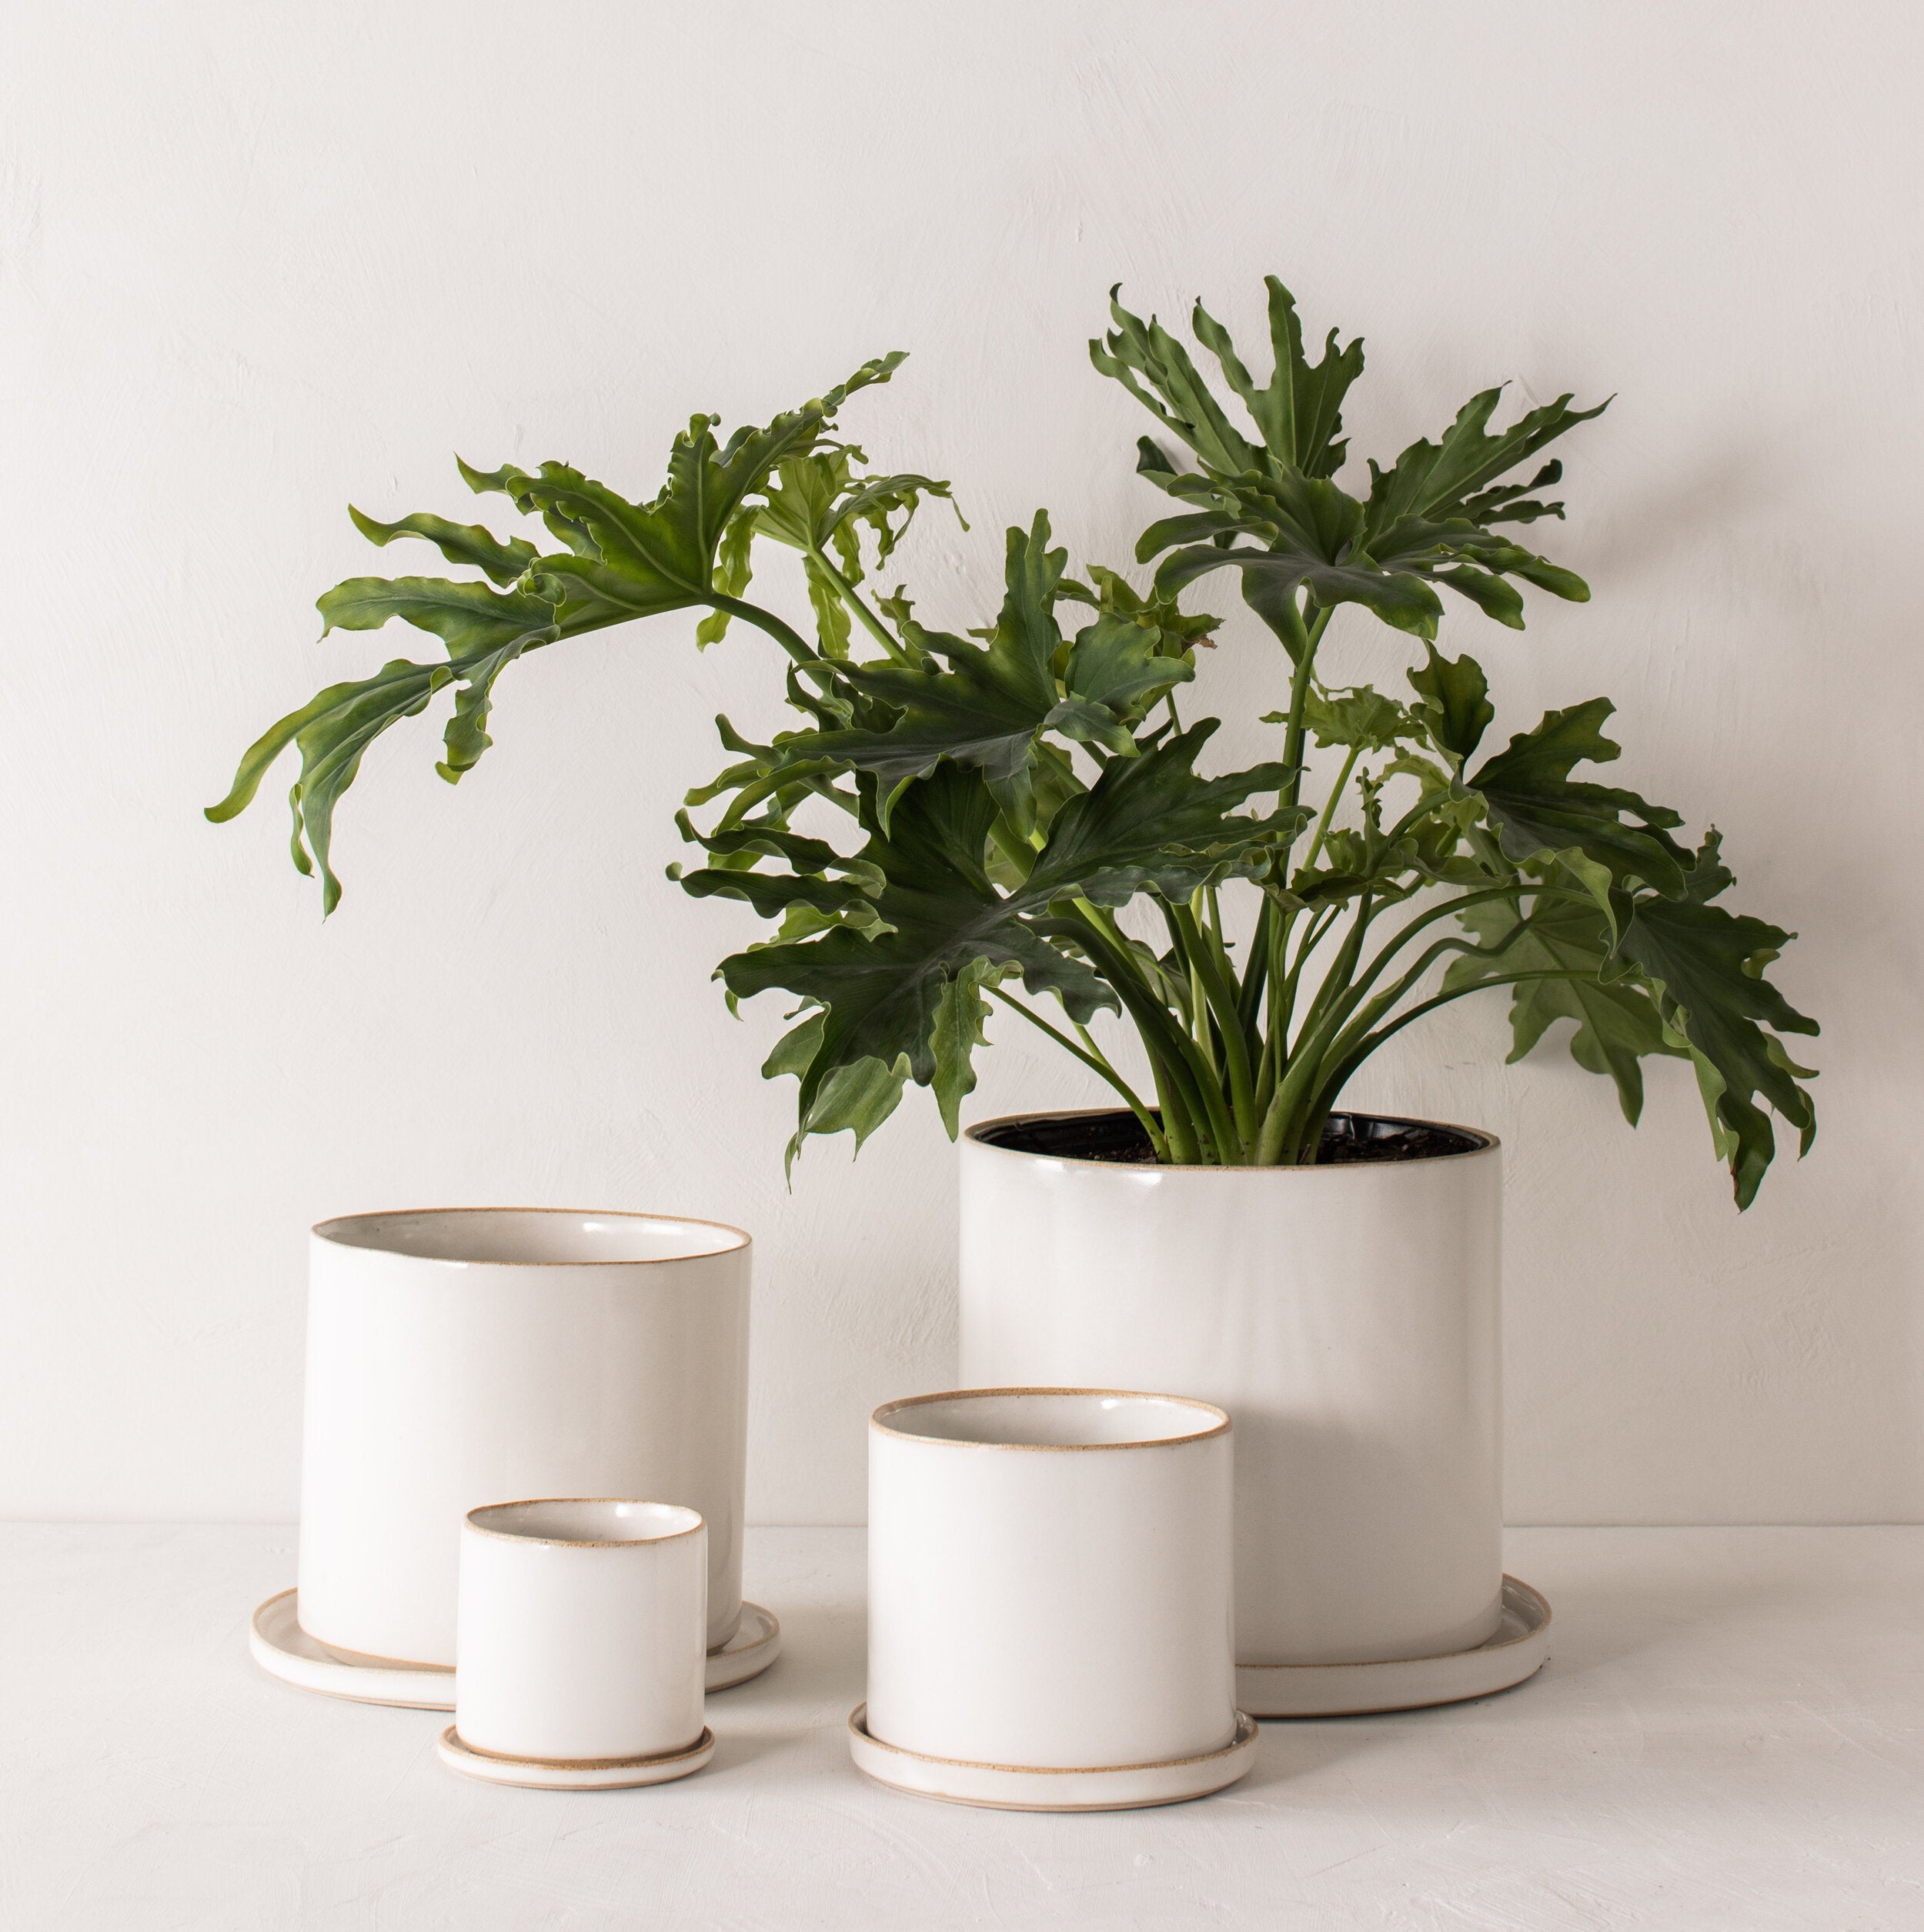 Four white ceramic planters with bottom drainage dishes, 4, 6, 8, and 10 inches. Staged on a white plaster textured tabletop against a plaster textured white wall. Large tall solum plant inside the 10 inch. Designed by Convivial Production, sold by Shop Verdant, Kansas City plant store.